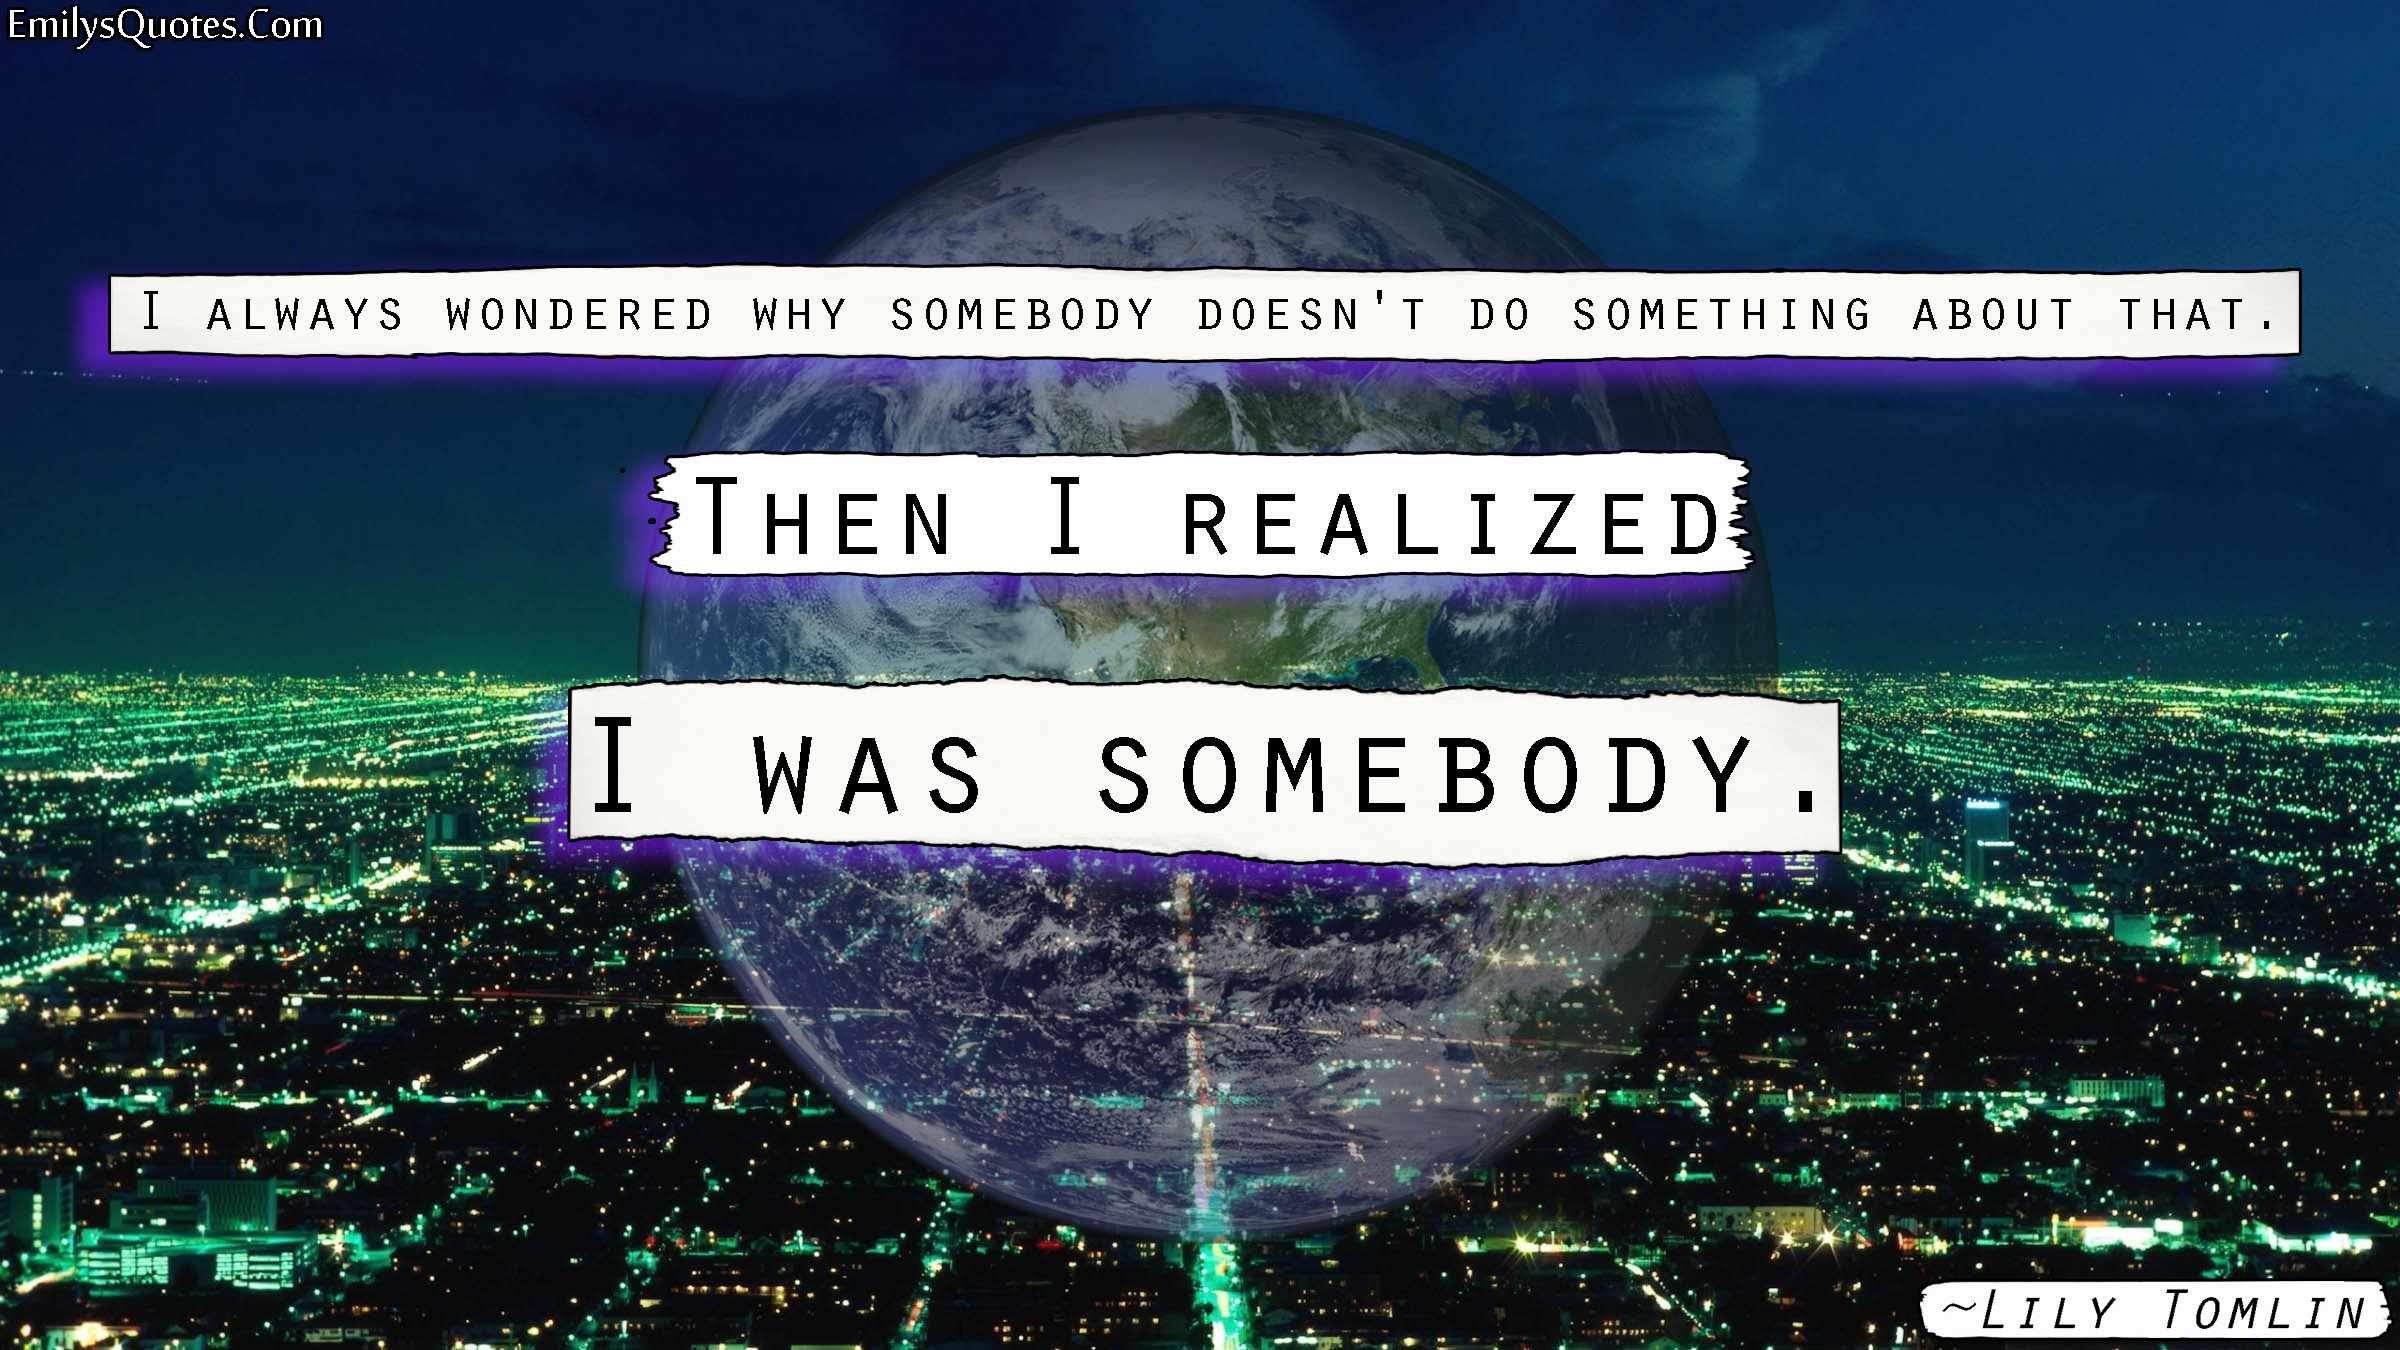 I always wondered why somebody doesn’t do something about that. Then I realized I was somebody